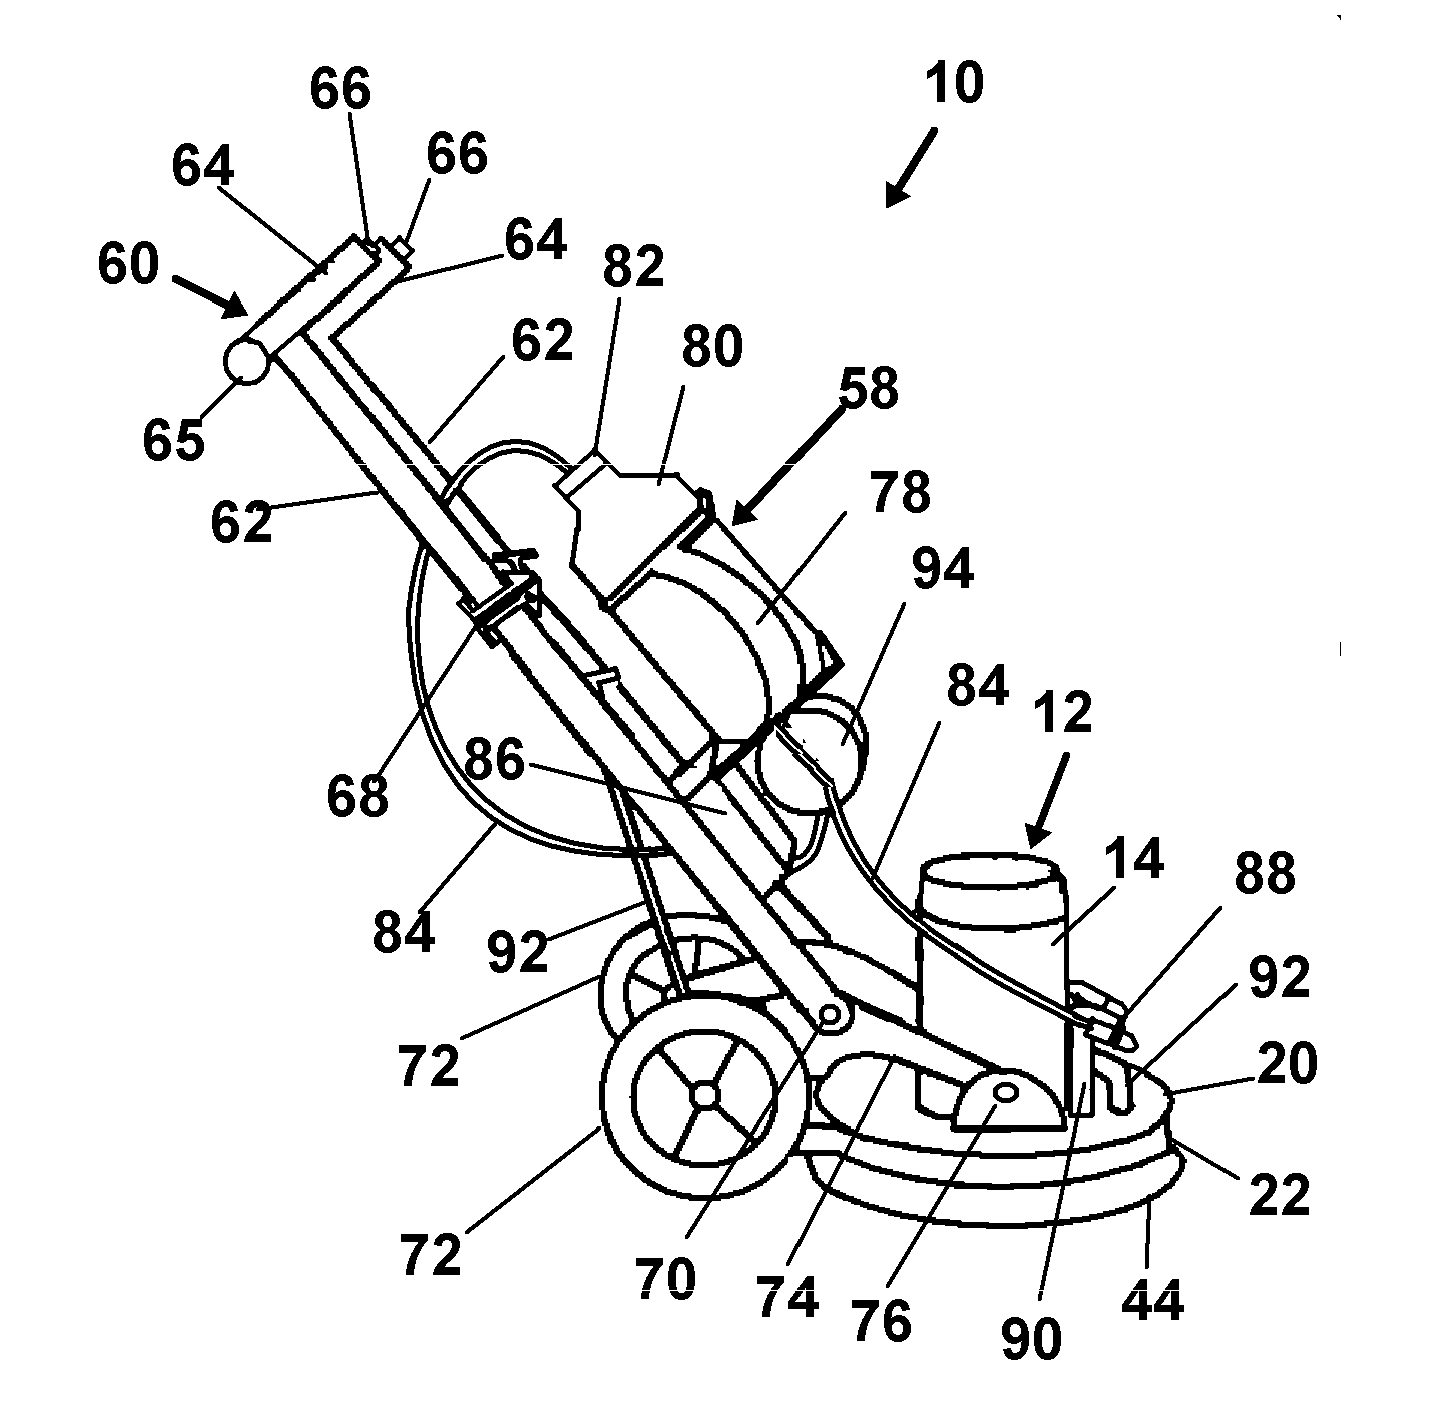 Orbital surface cleaning apparatus